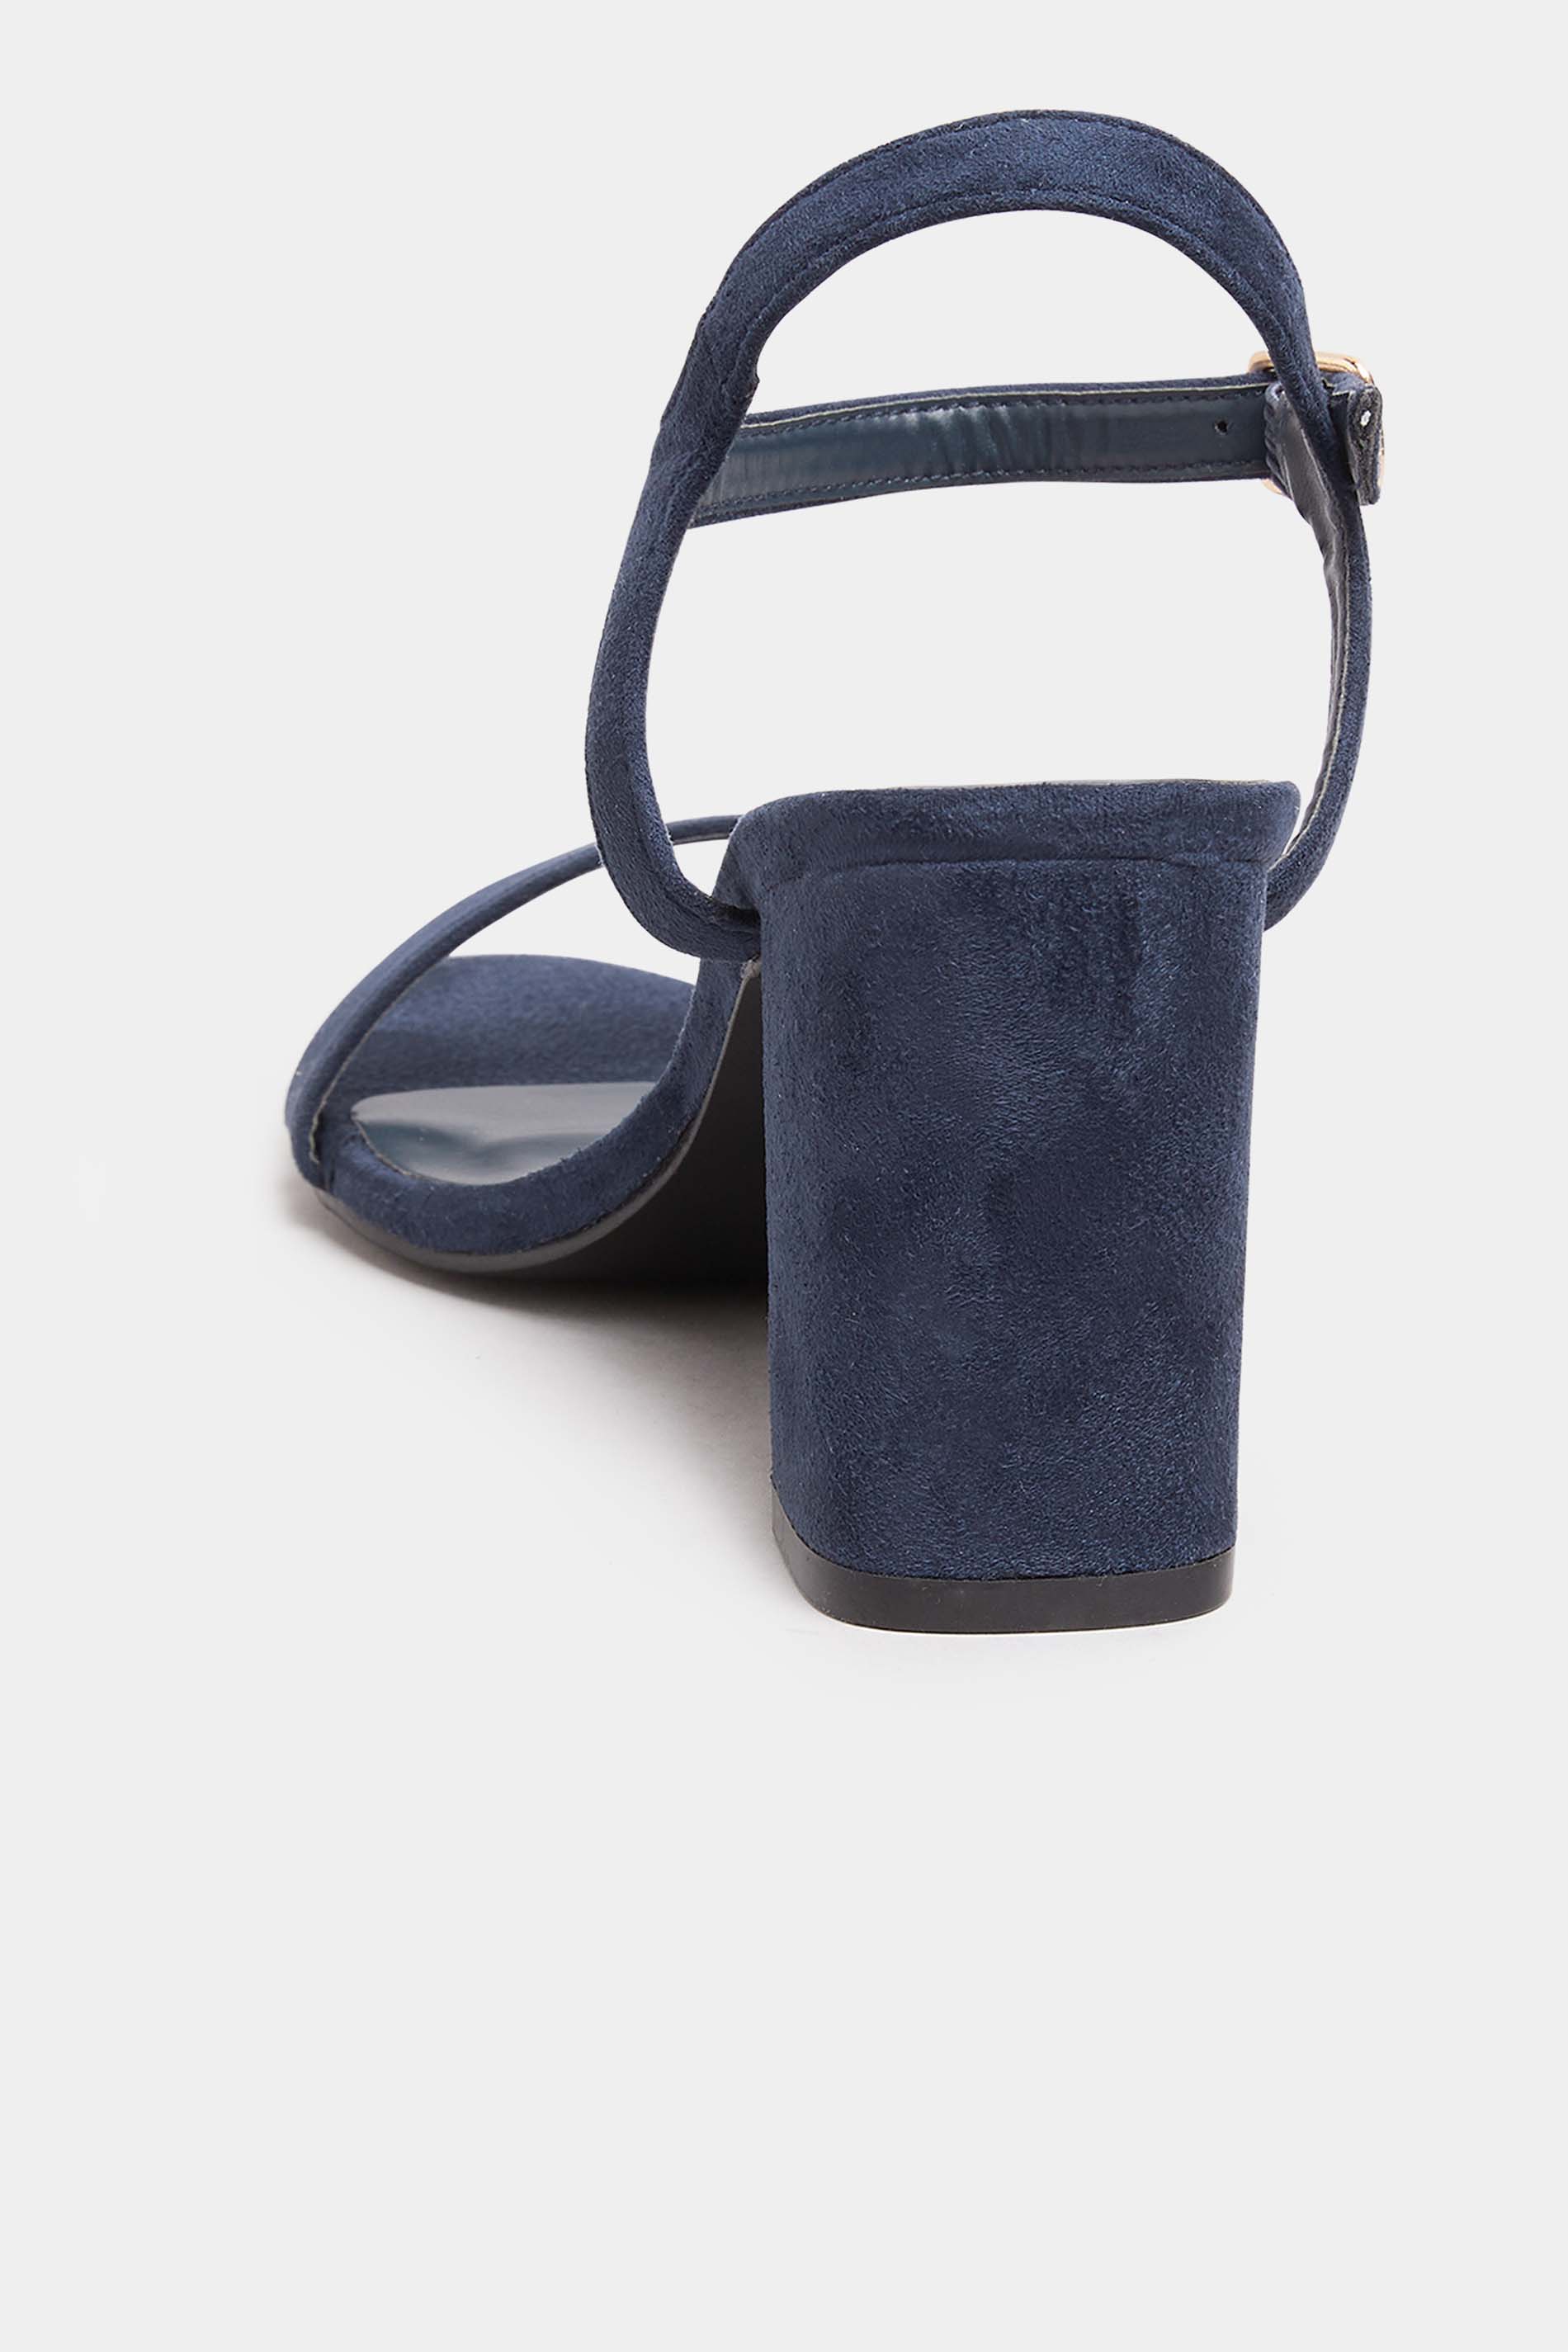 LIMITED COLLECTION Navy Blue Block Heel Sandal In Extra Wide EEE Fit ...